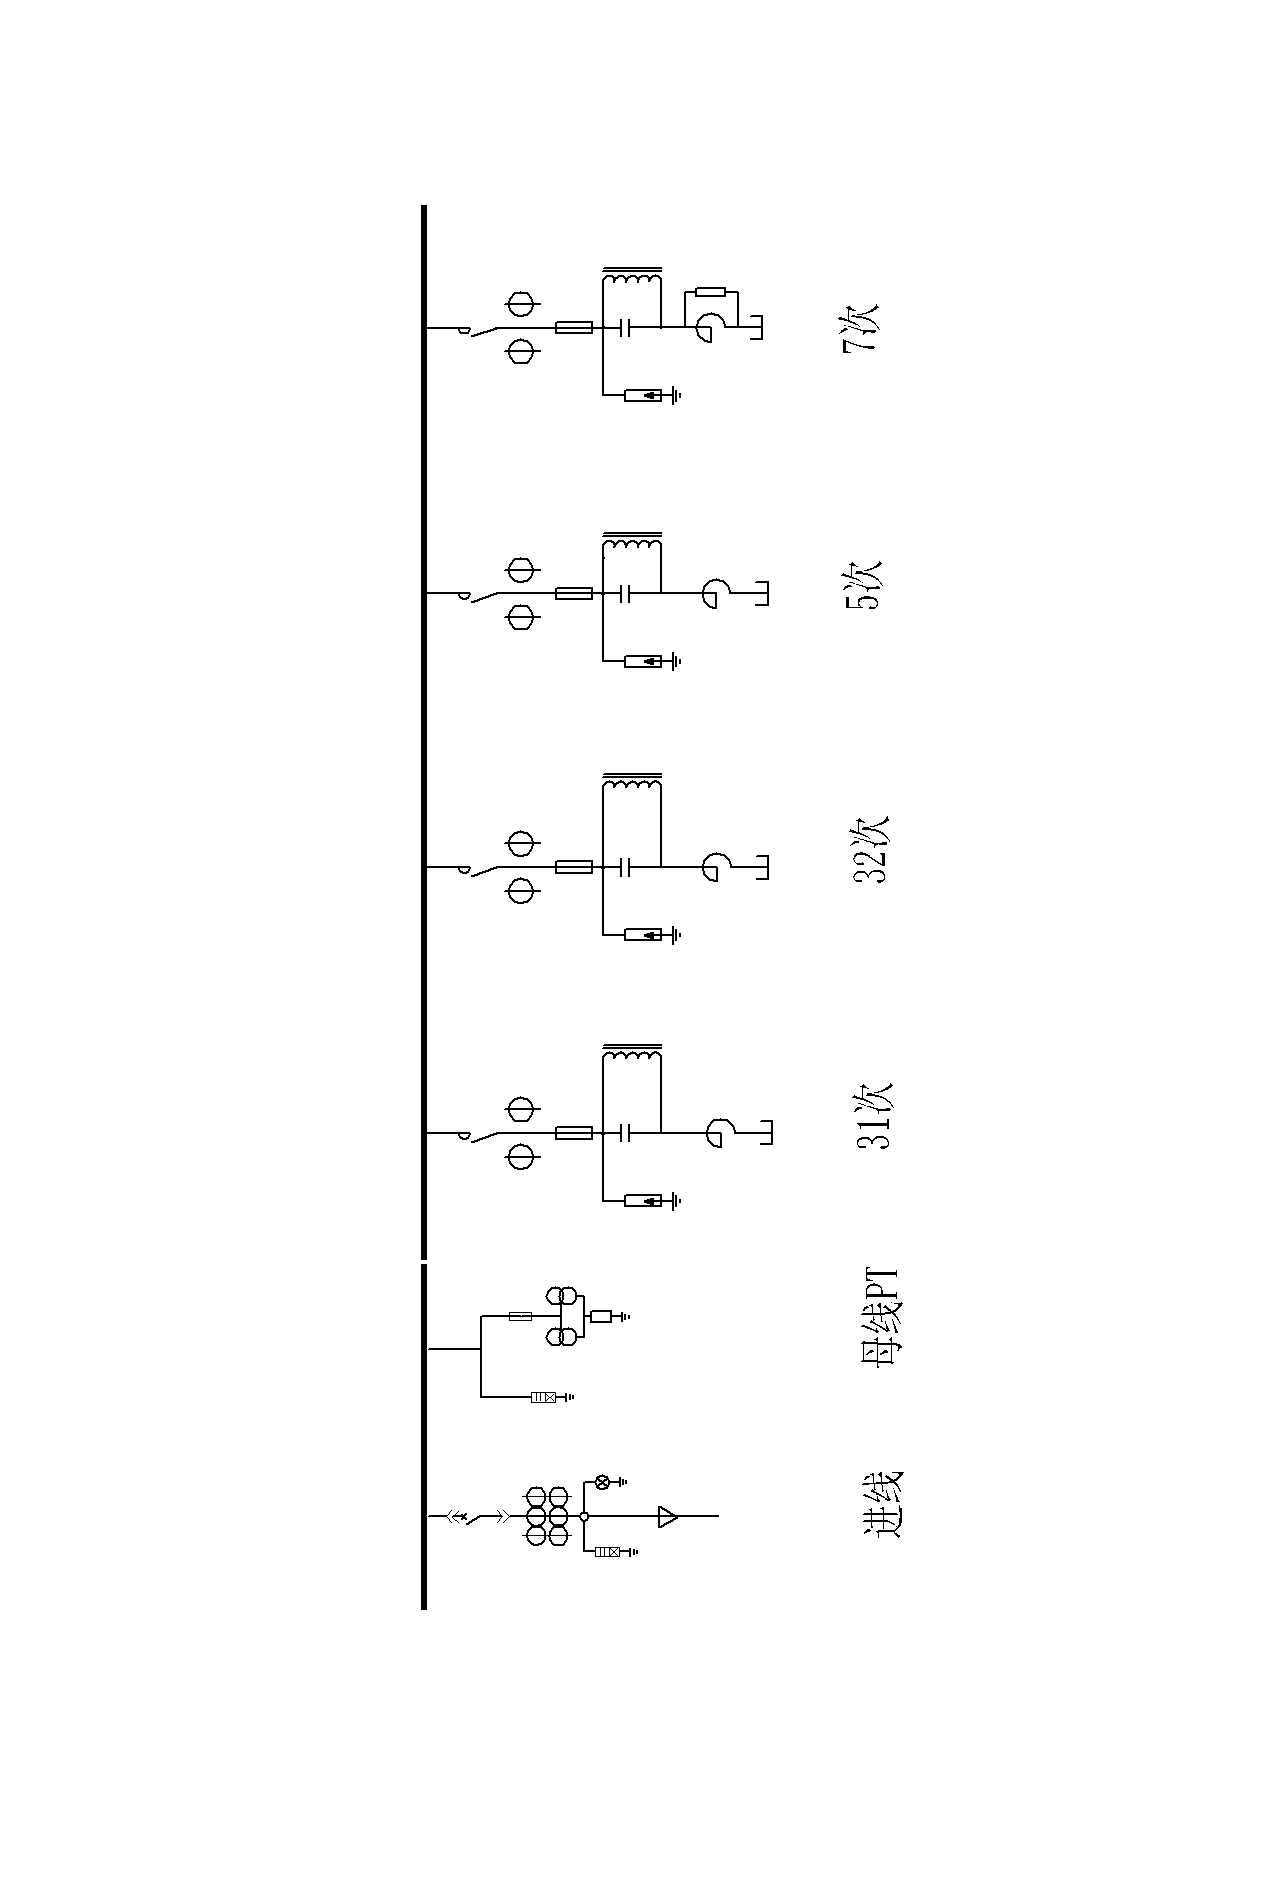 Methods for distributing reactive power compensation capacity and switching branch circuits of passive filter